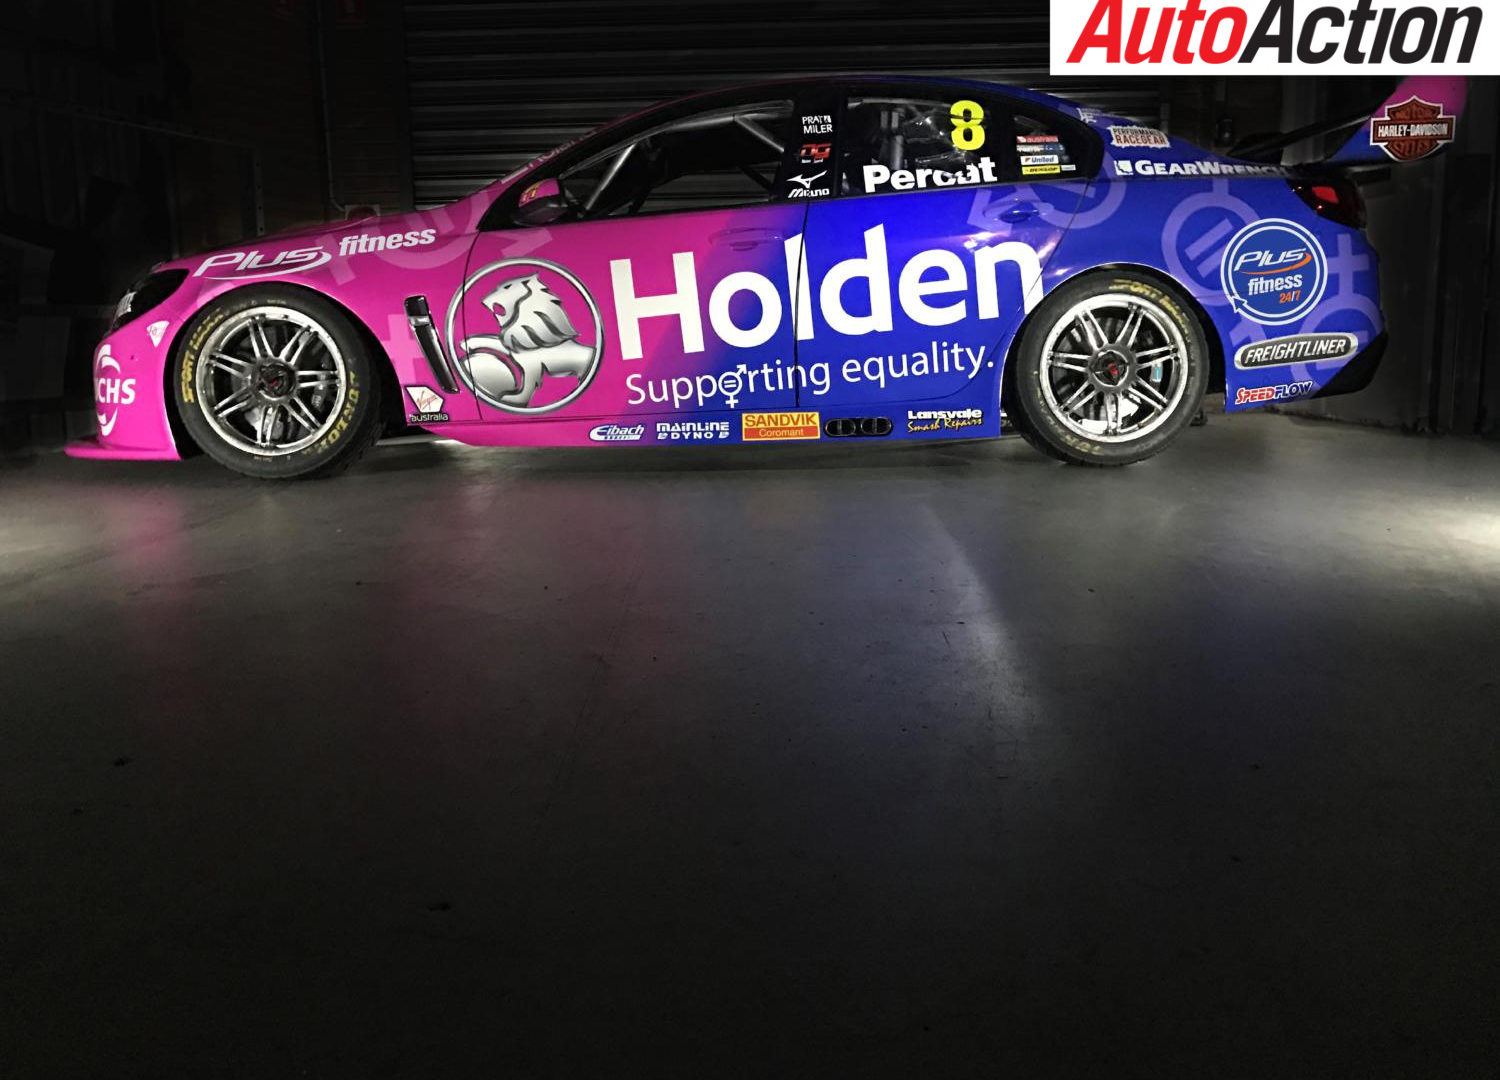 BJR & Holden Continue To Support Equality - Photo: Supplied